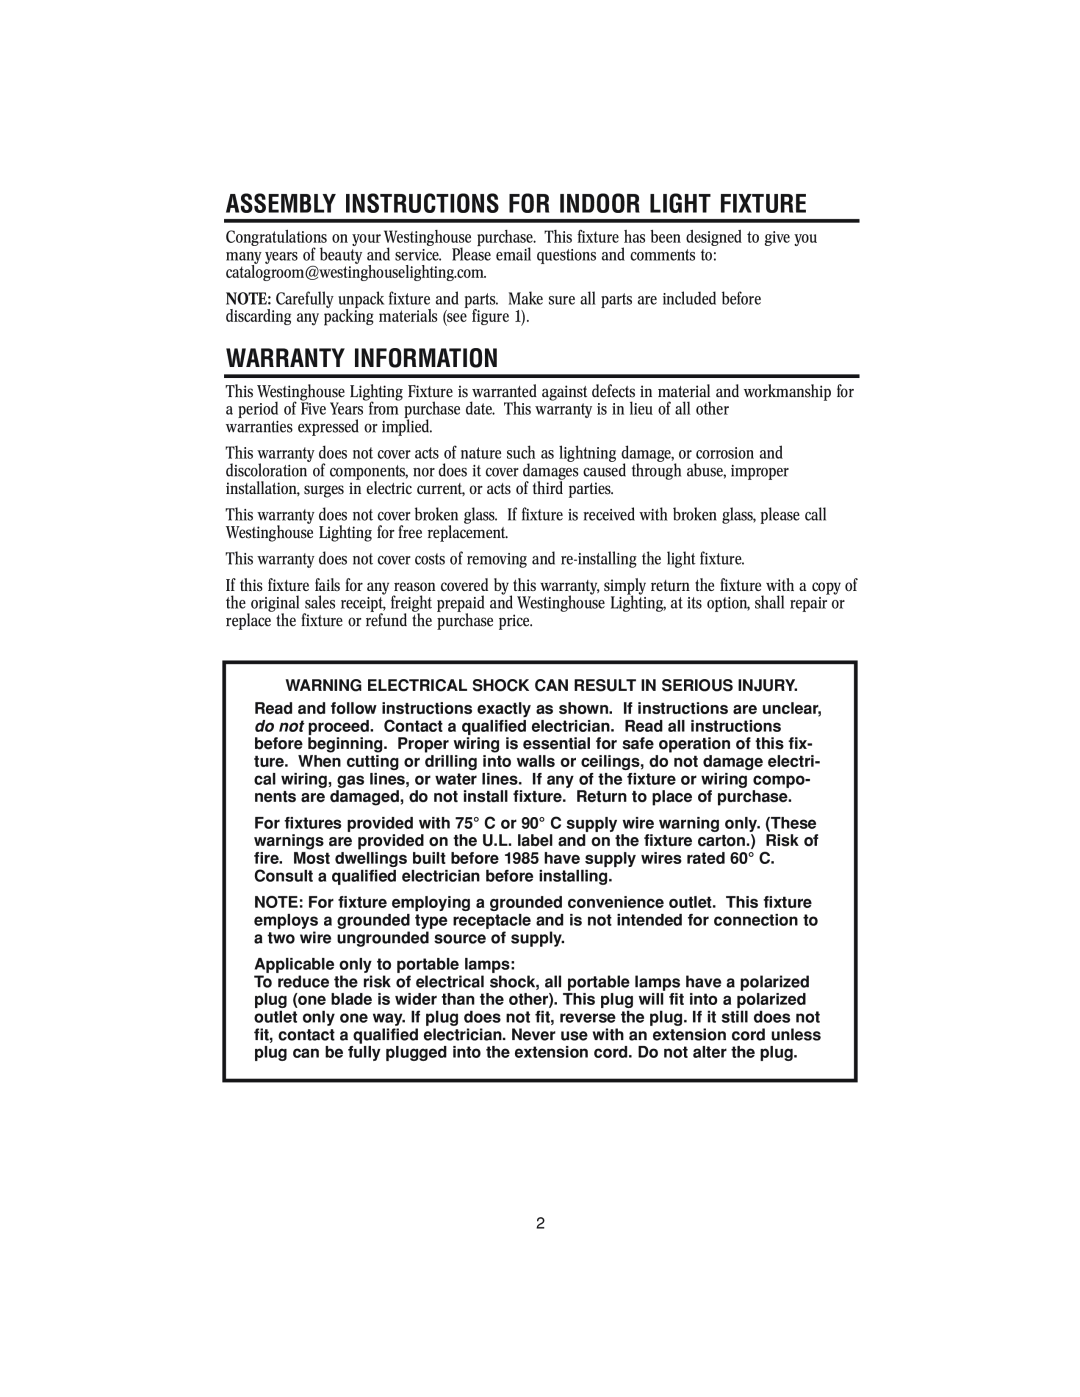 Westinghouse 62204 owner manual Assembly Instructions For Indoor Light Fixture, Warranty Information 